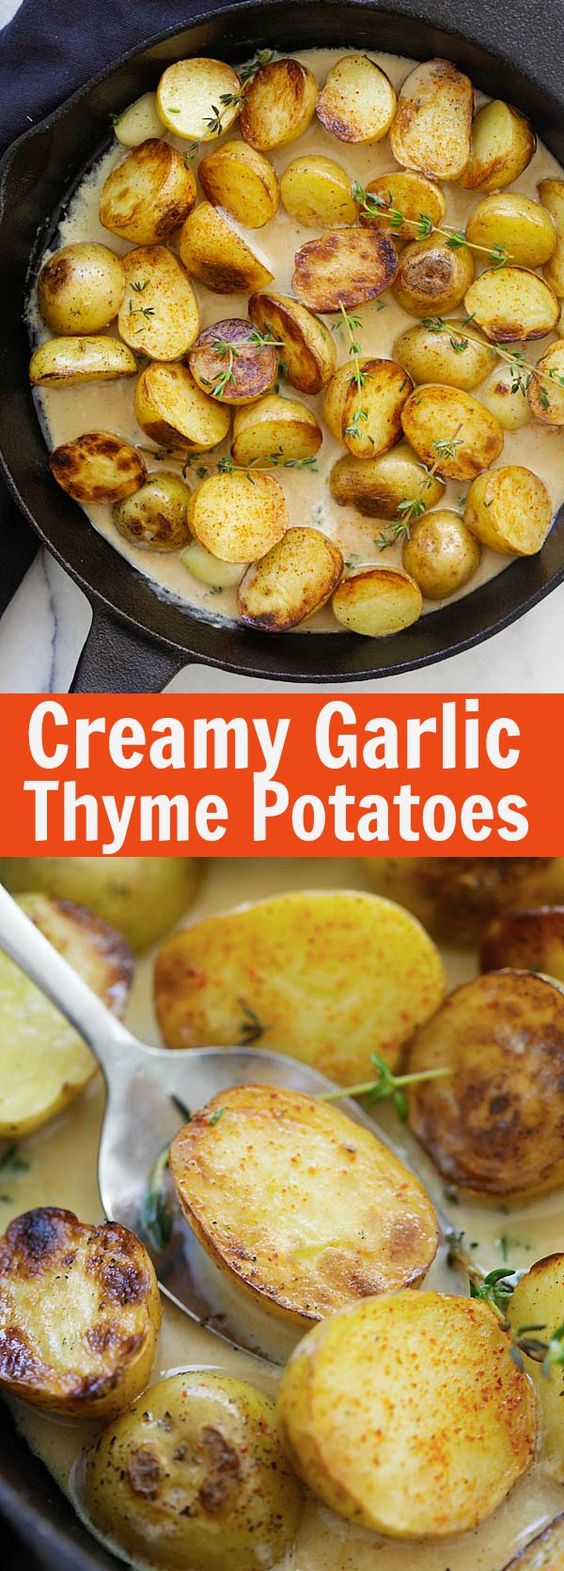 Creamy Garlic Thyme Potatoes – the best and easiest potatoes with garlic thyme in buttery and creamy sauce. A perfect side dish | rasamalaysia.com